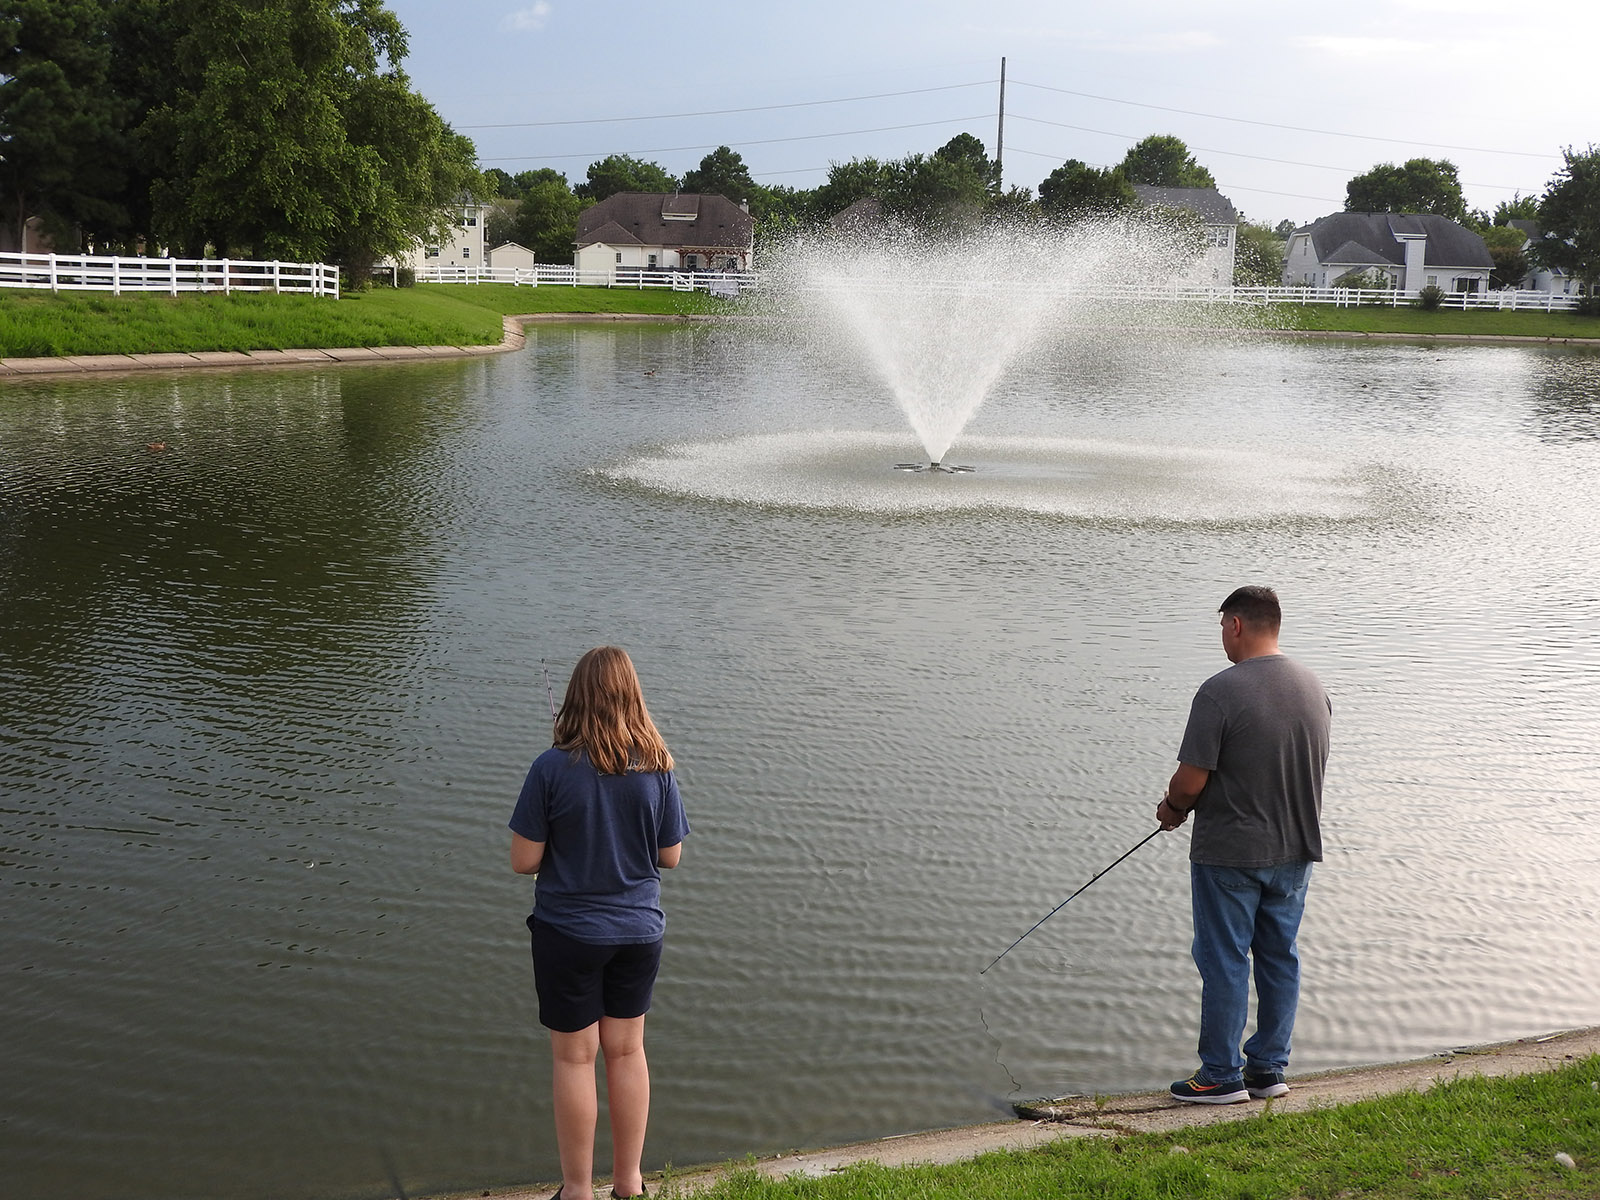 An image of a man and girl standing on the banks of a lake fishing in a local retention pond